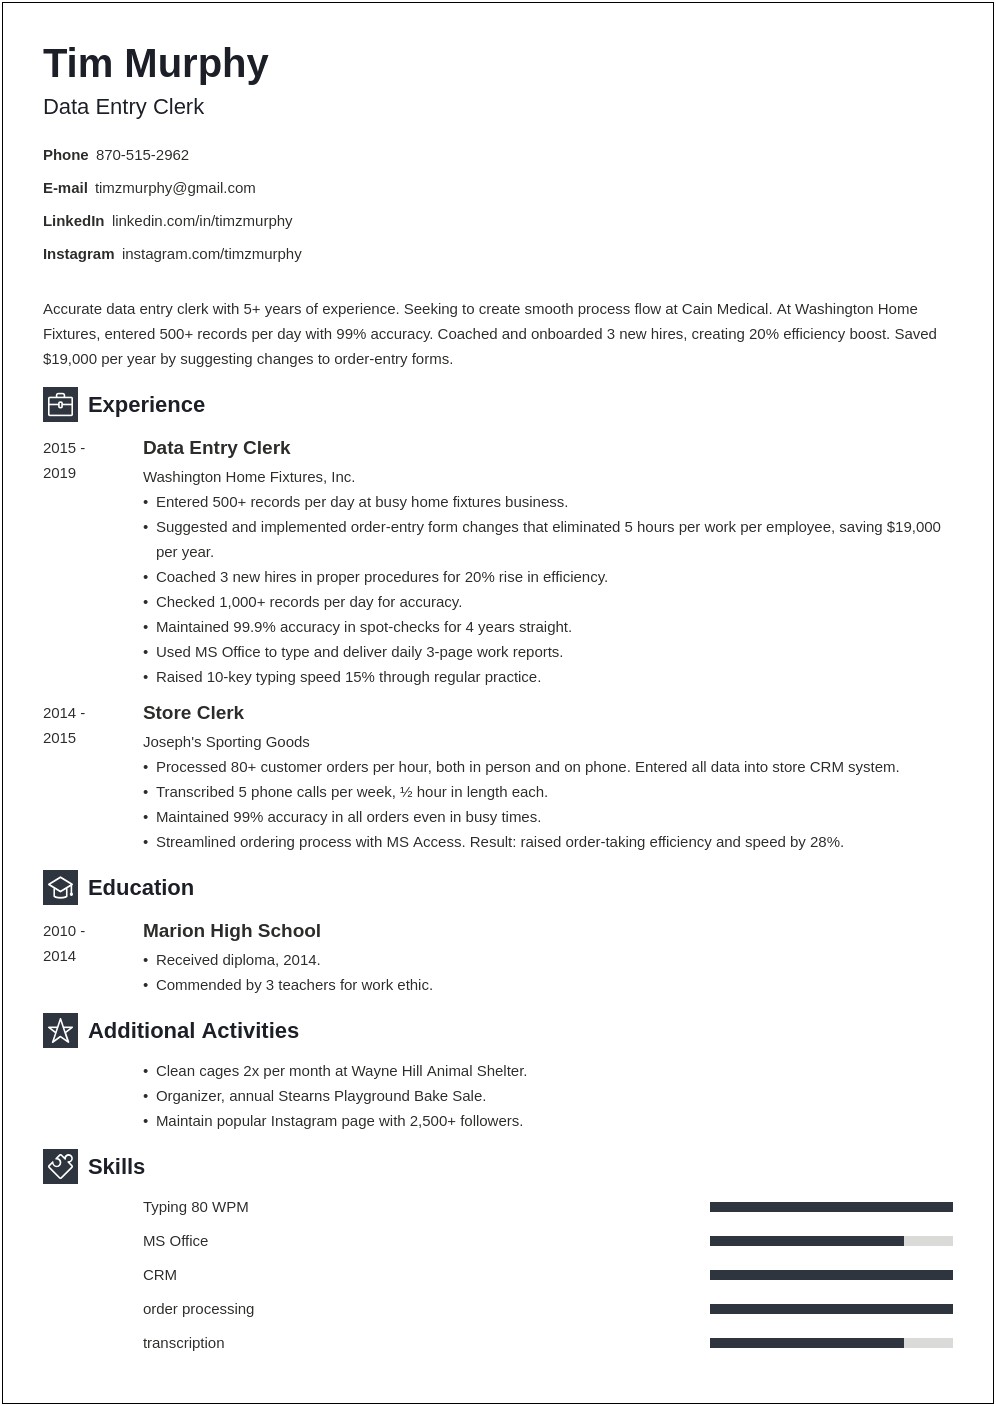 Free Sample Resumes For Data Entry Jobs